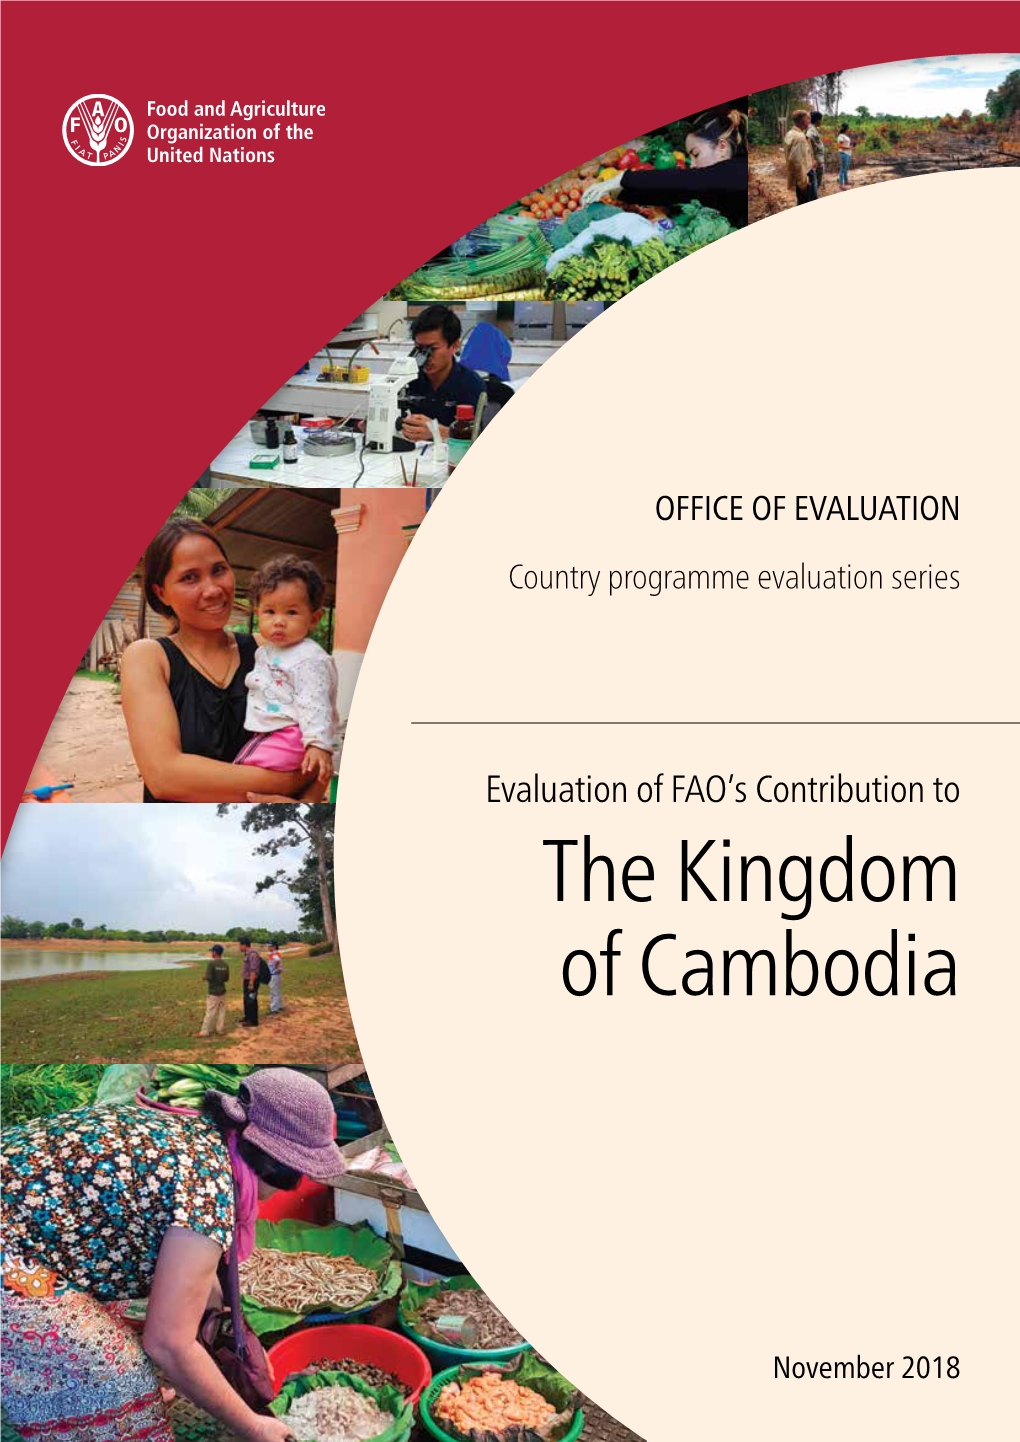 Evaluation of FAO's Contribution to the Kingdom of Cambodia